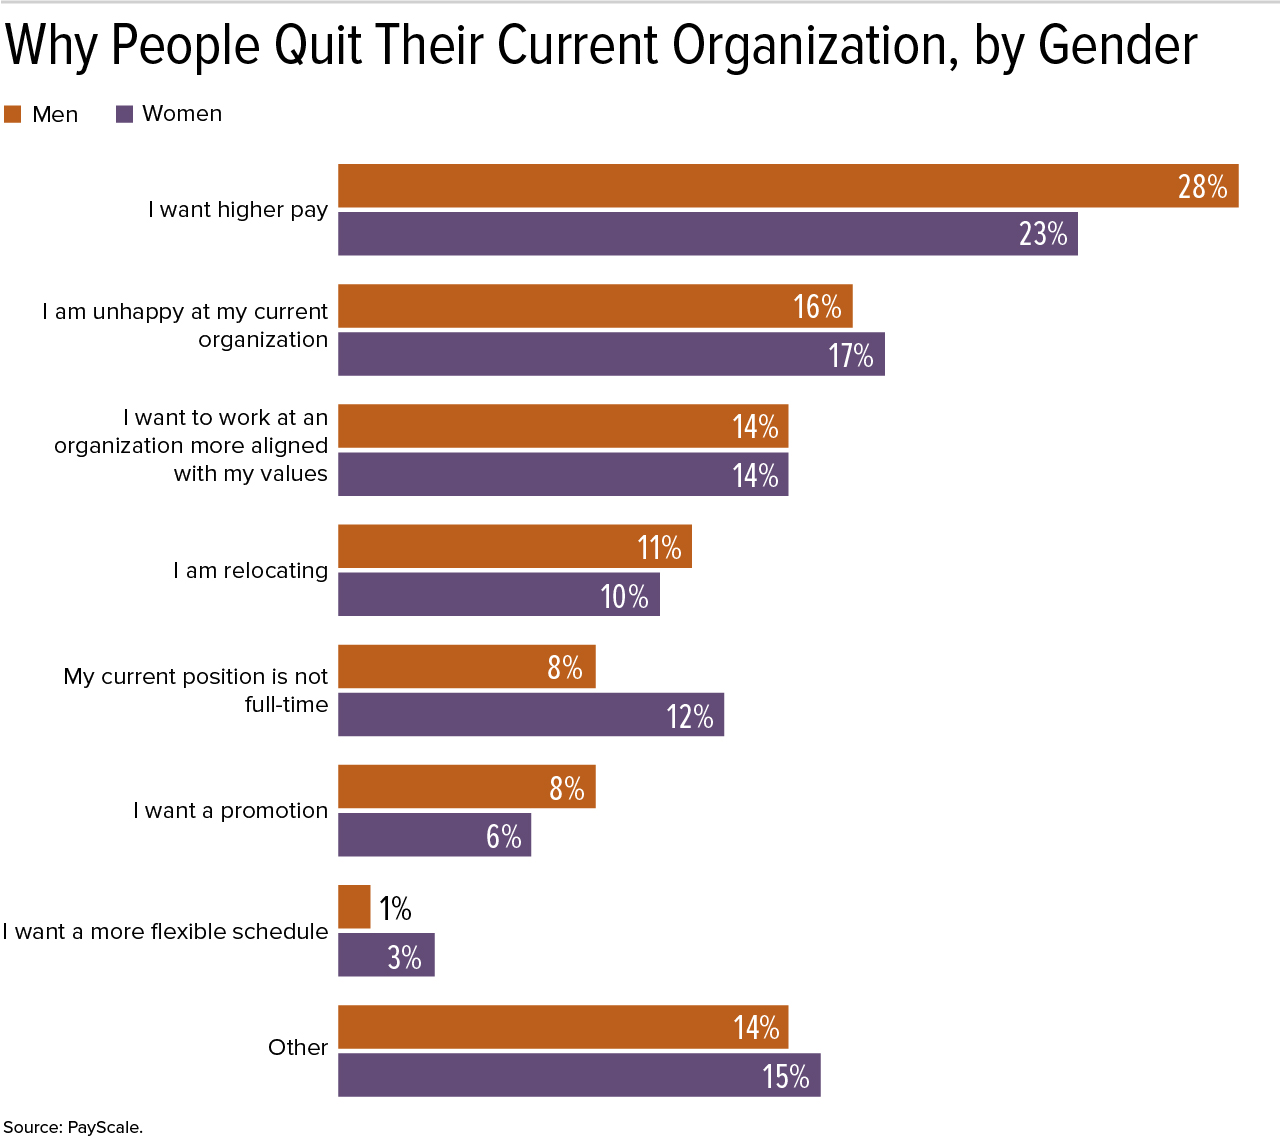 Why People Quit Their Current Organization, by Gender